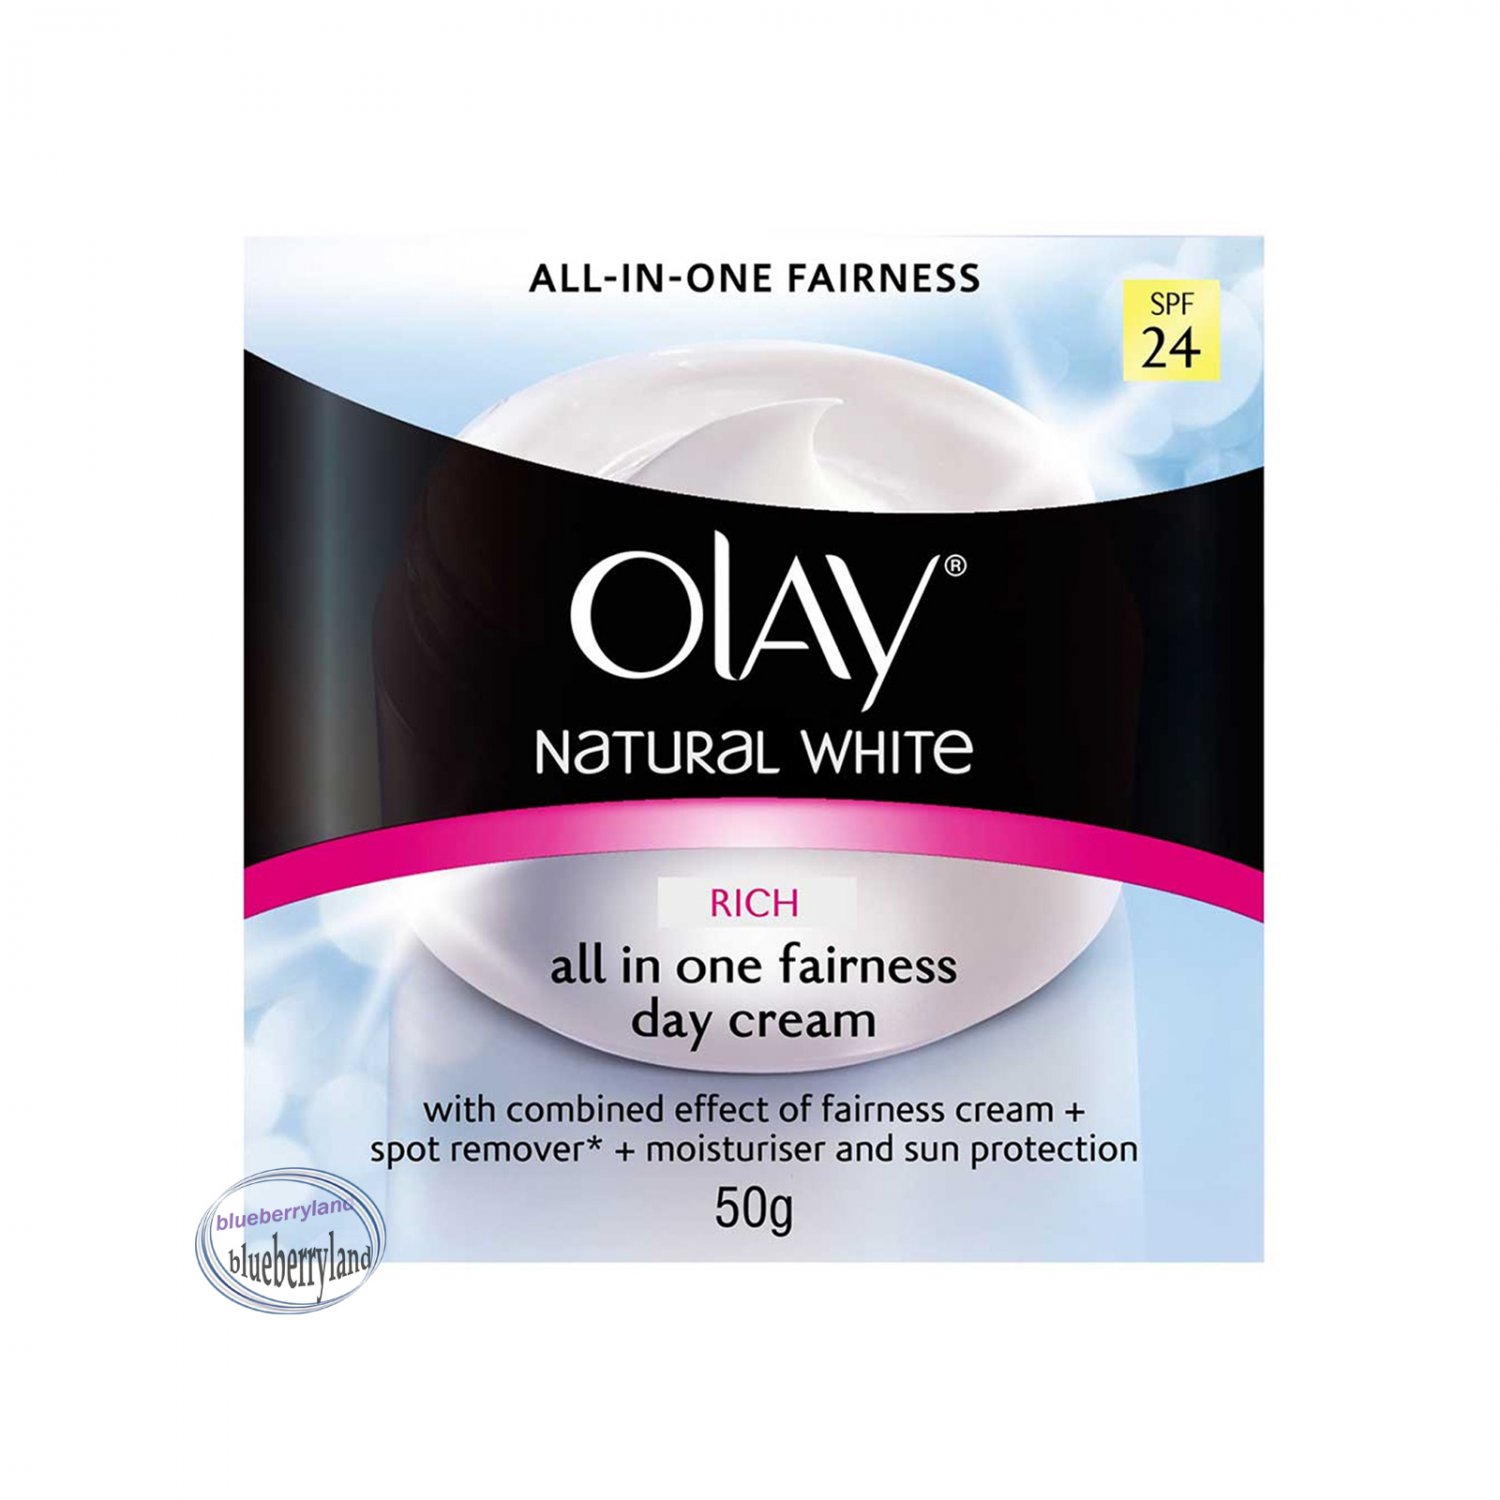 Olay Natural White Rich all in One Fairness Day Cream SPF24 50g